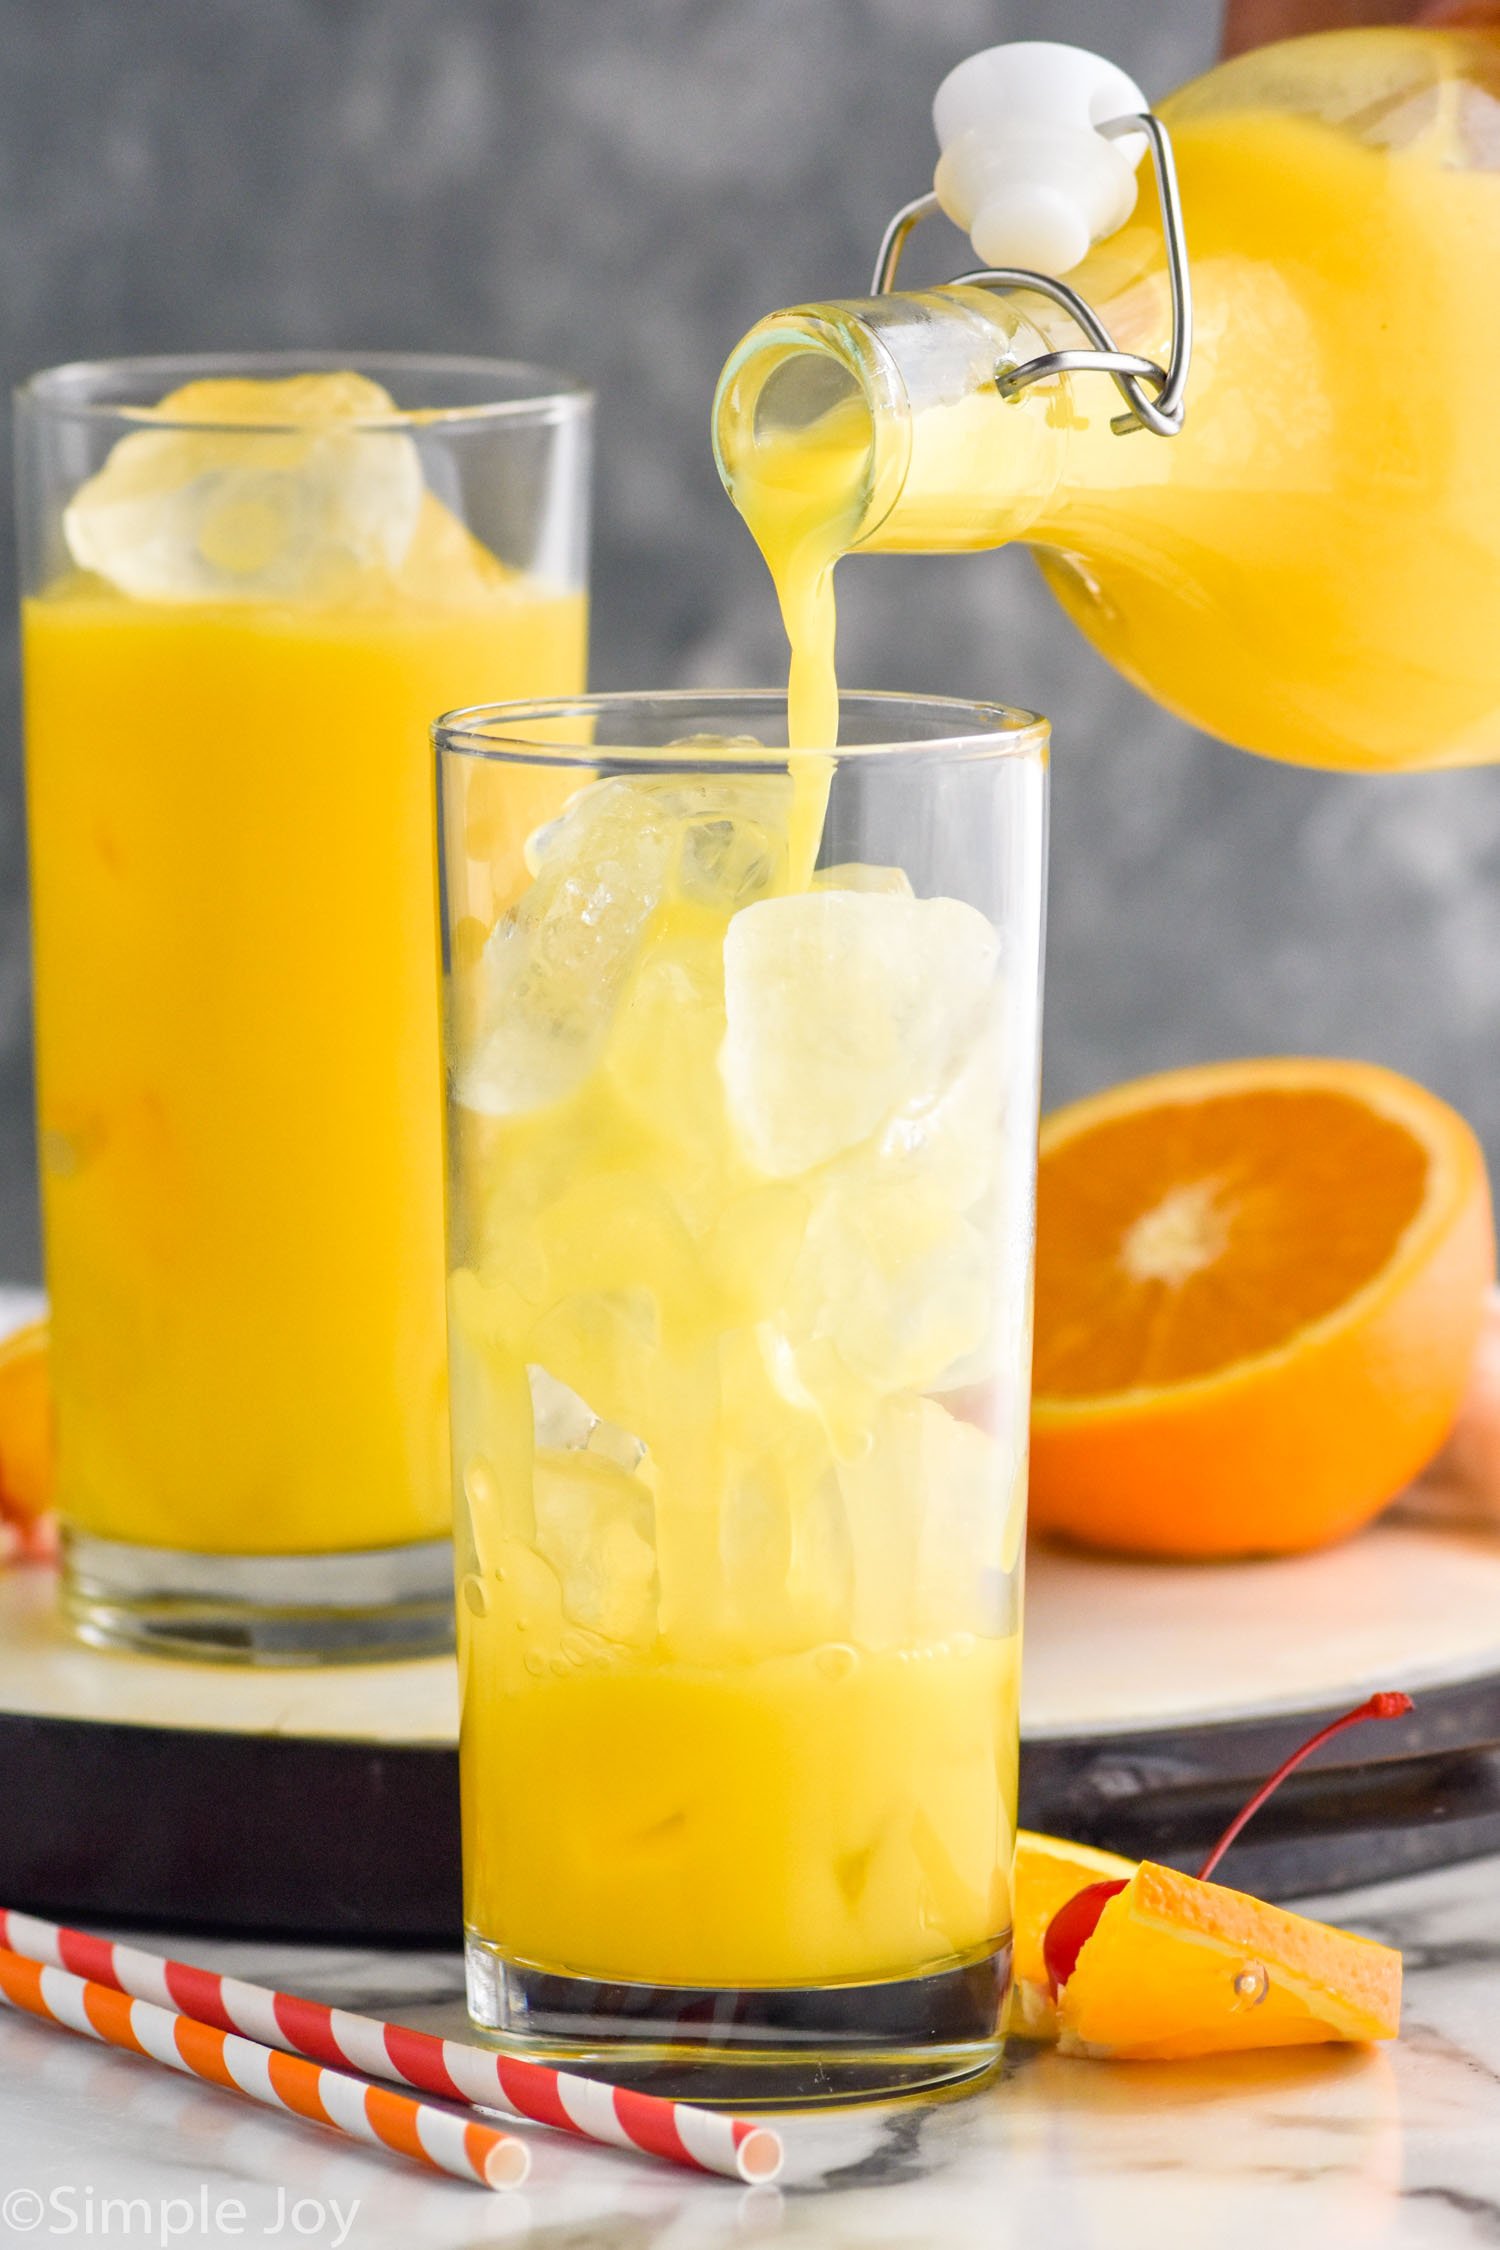 Side view of orange juice being poured into glass of ice for Tequila Sunrise recipe. Another glass of juice in background and fruit on counter for garnish.